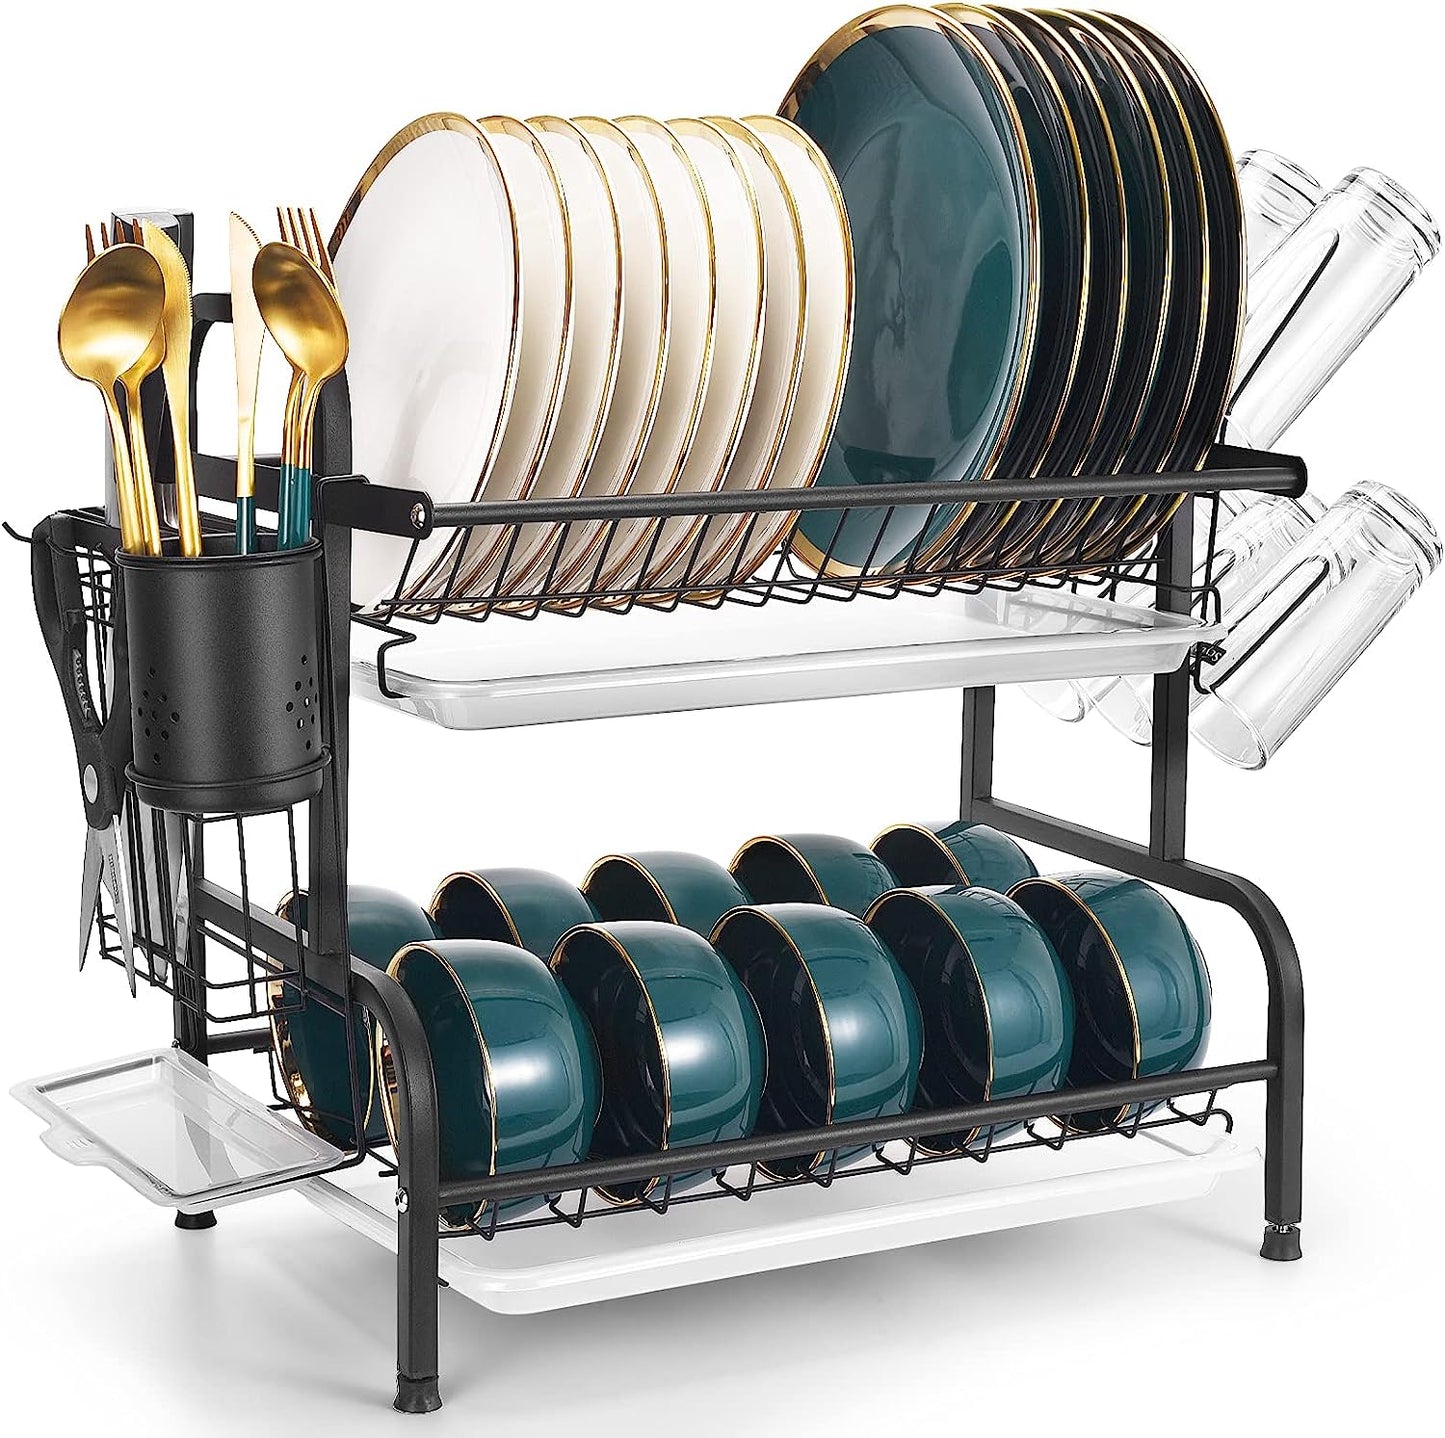 Dish Drying Rack, 2-Tier Compact Kitchen Dish Rack, Large Rust-Proof Dish Drainer with Utensil Holder